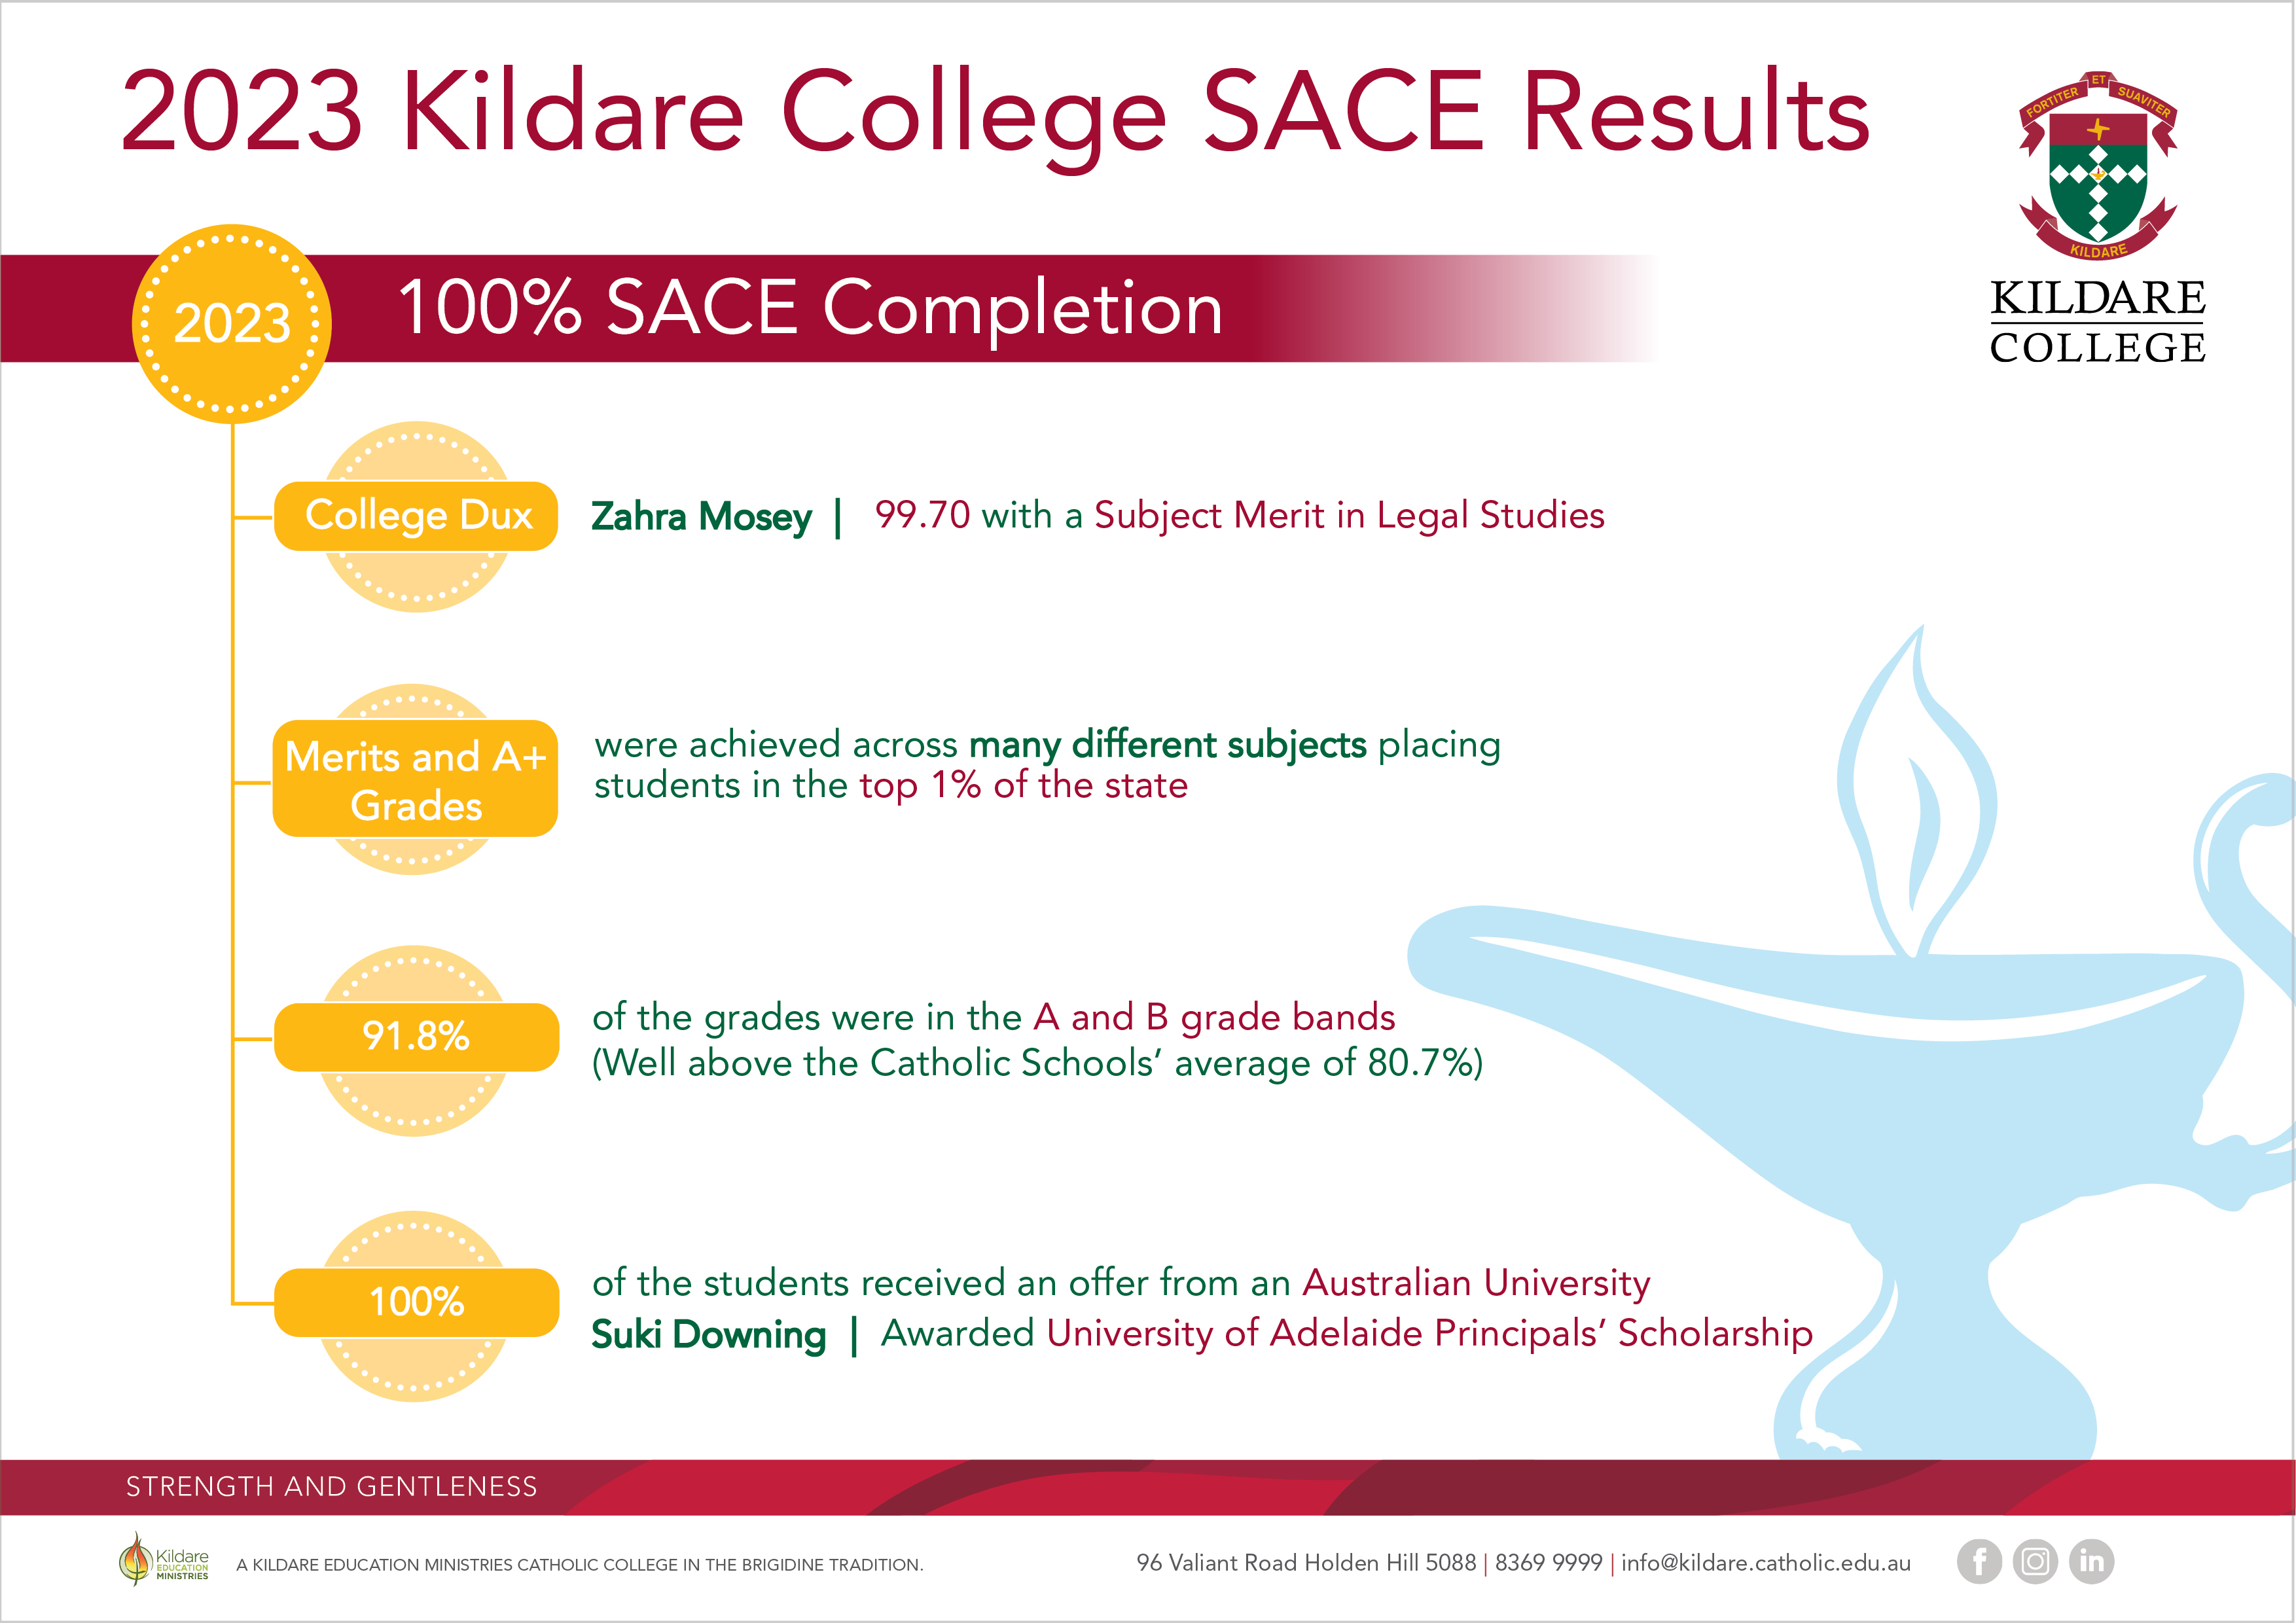 <span class="text-center">Kildare College would like to congratulate the Class of 2023 for their outstanding SACE results.</span>